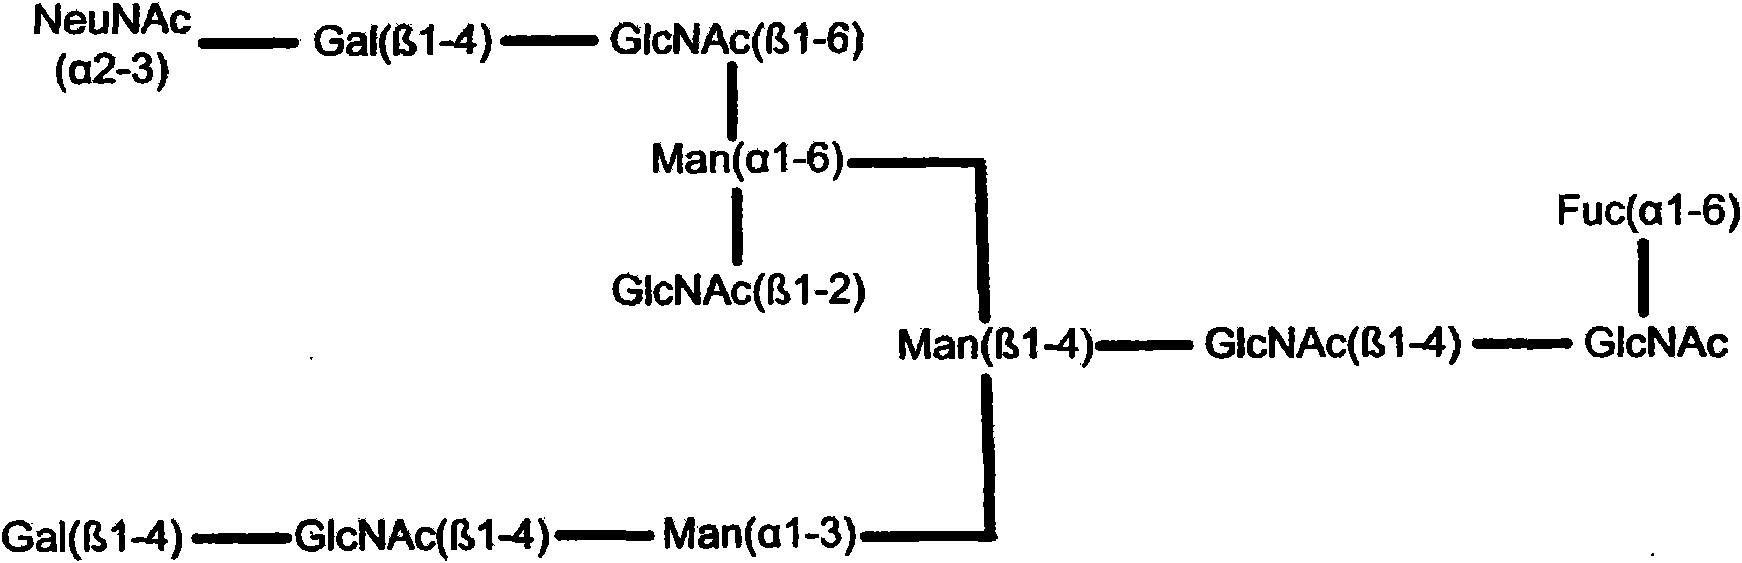 System and method for representing n-linked glycan structures